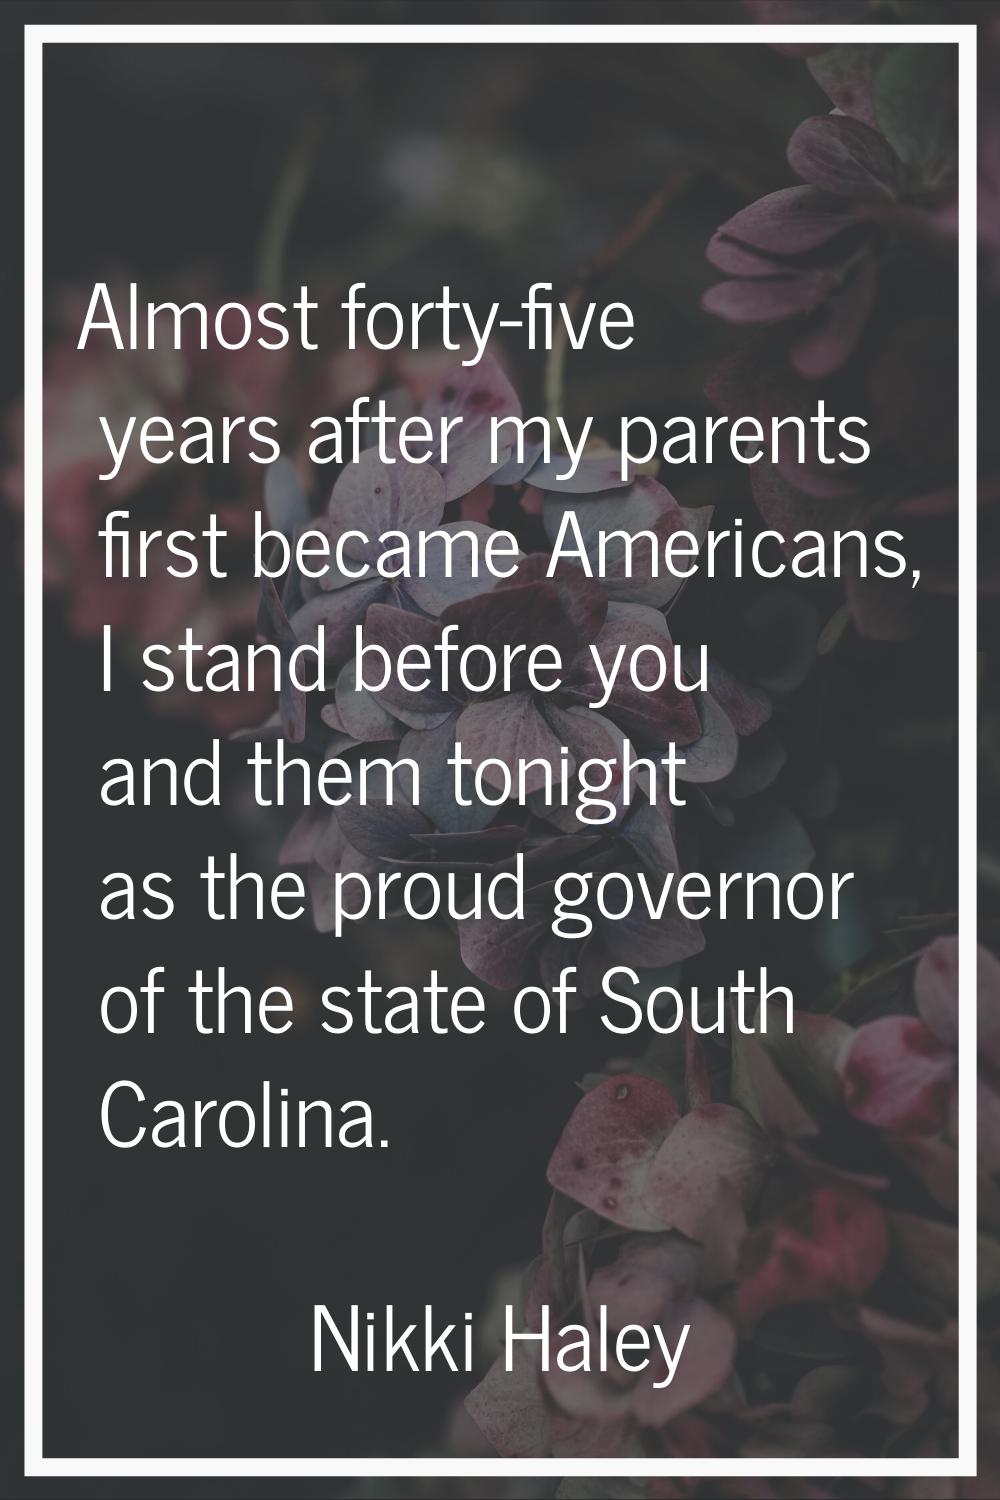 Almost forty-five years after my parents first became Americans, I stand before you and them tonigh